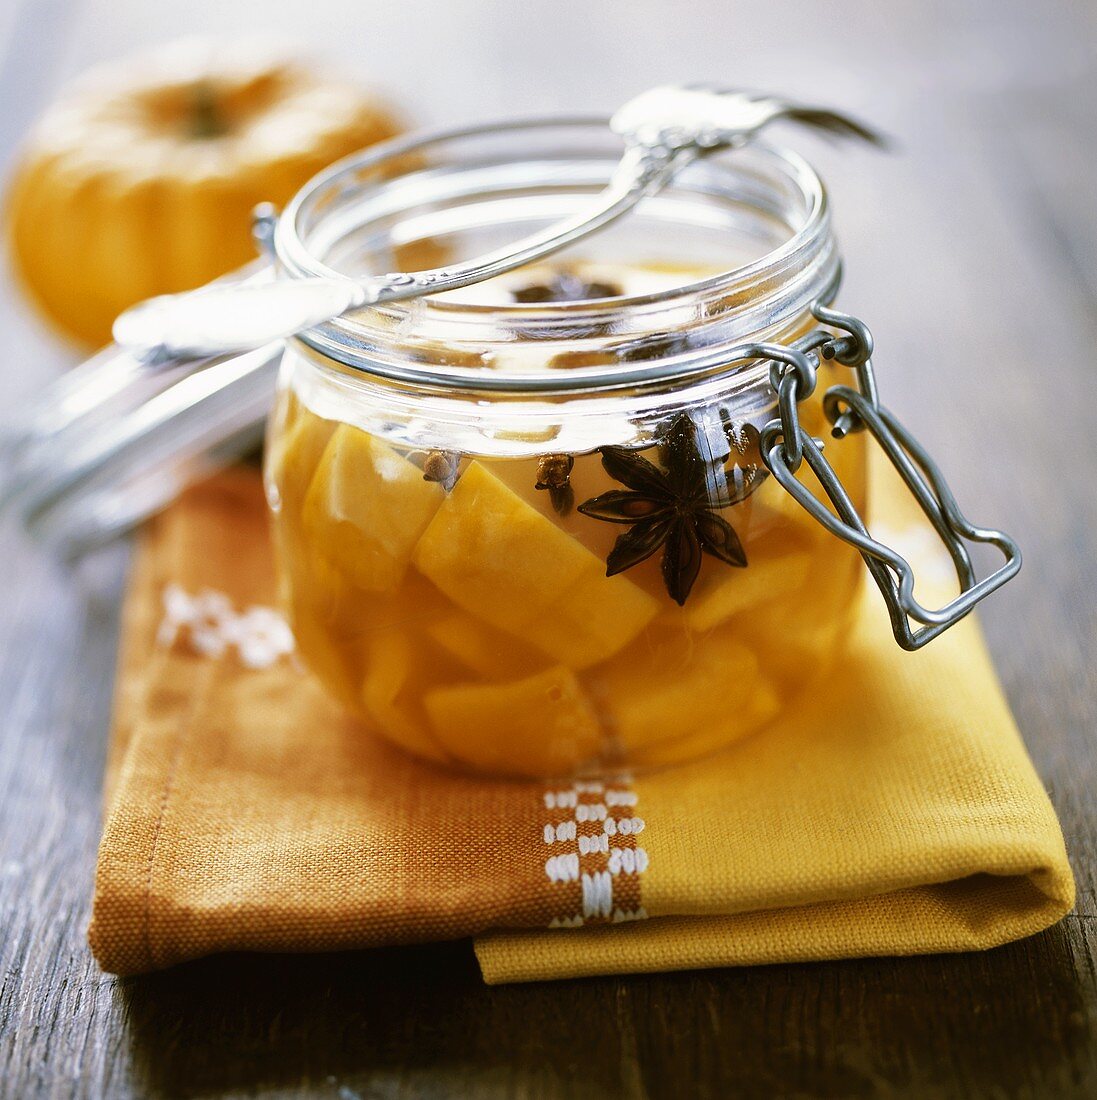 Pumpkin compote with star anise & cloves in preserving jar